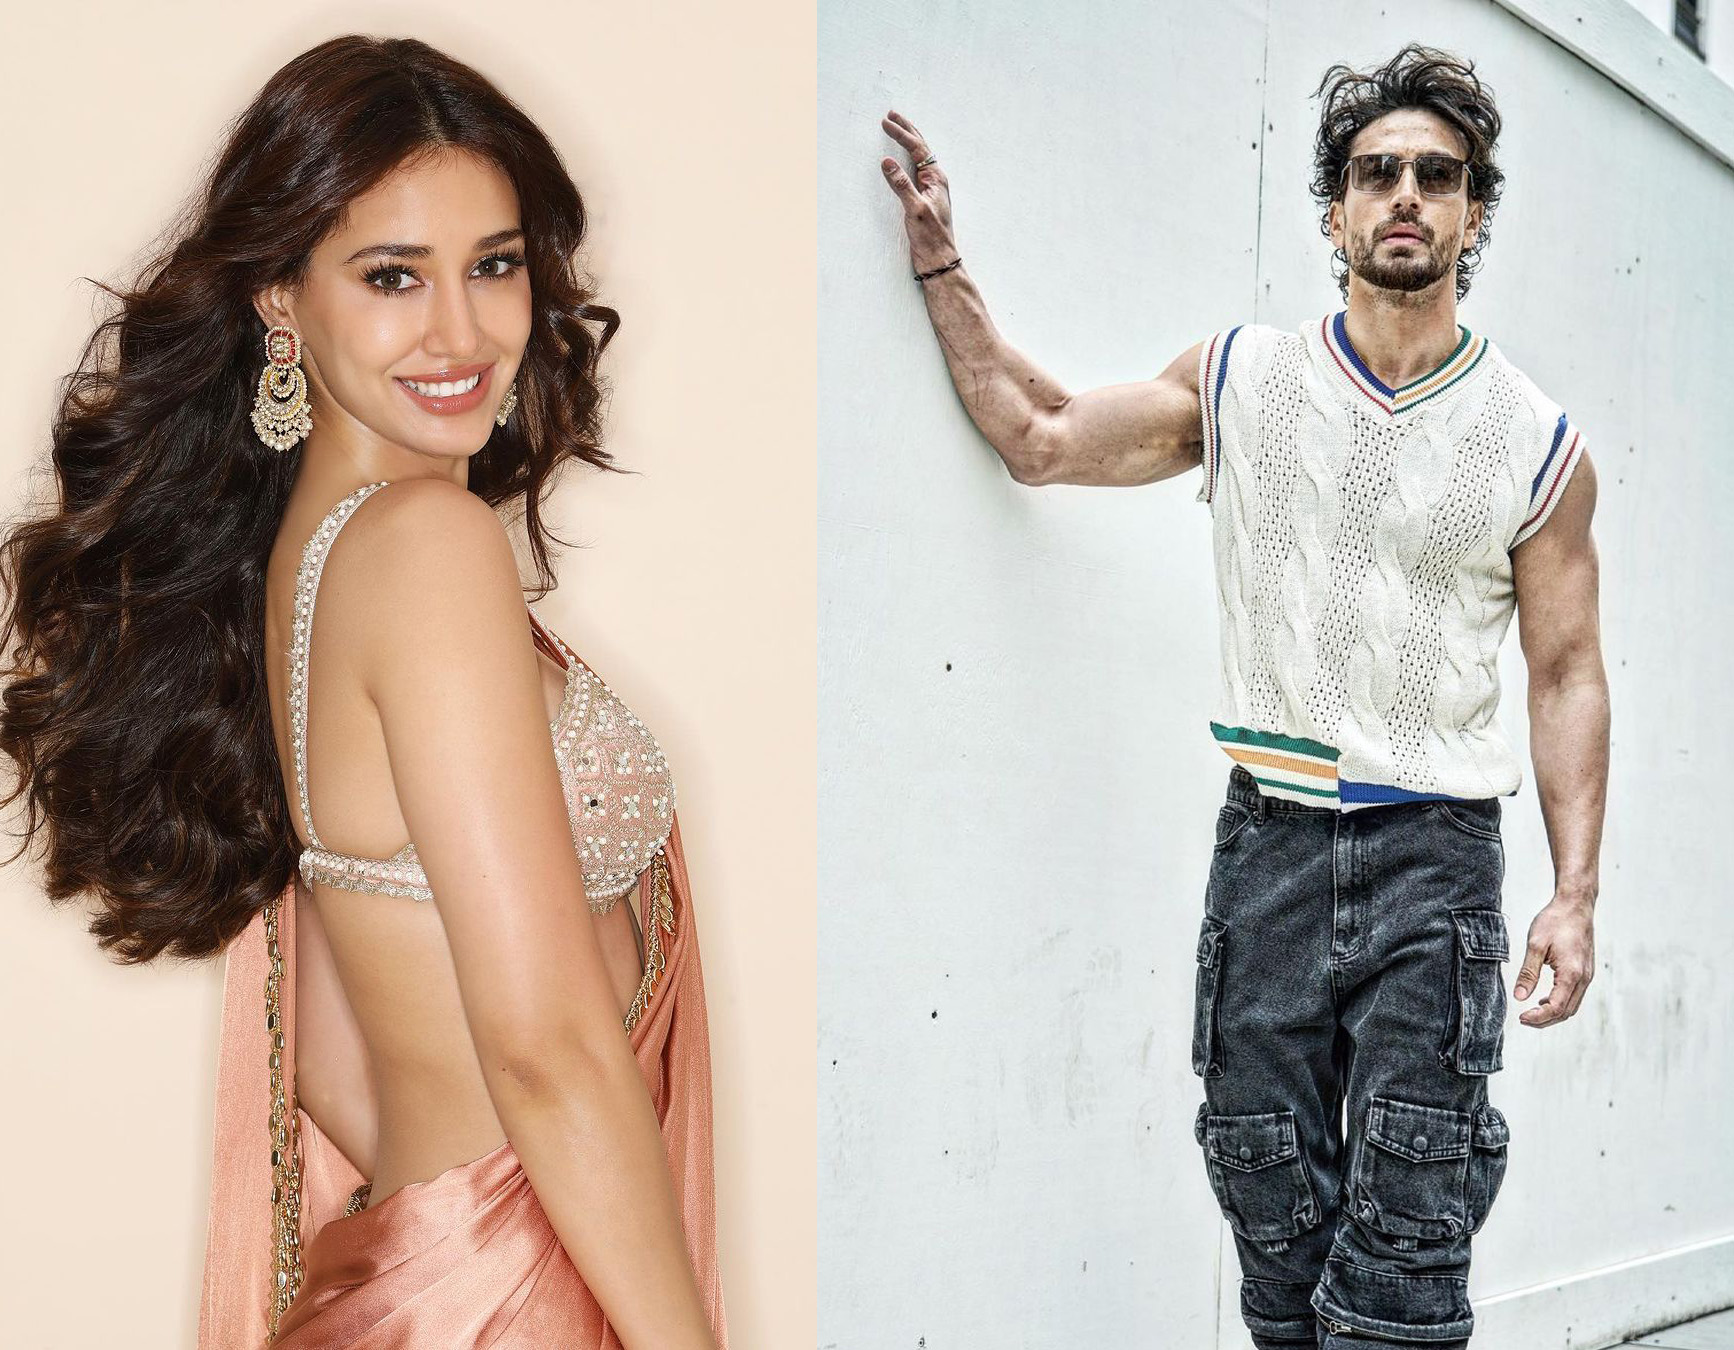 Khatron Ke Khiladi Season 14 participant stated about Tiger Shroff's ex-girlfriend Disha Patani! Briefly talked about her equation 